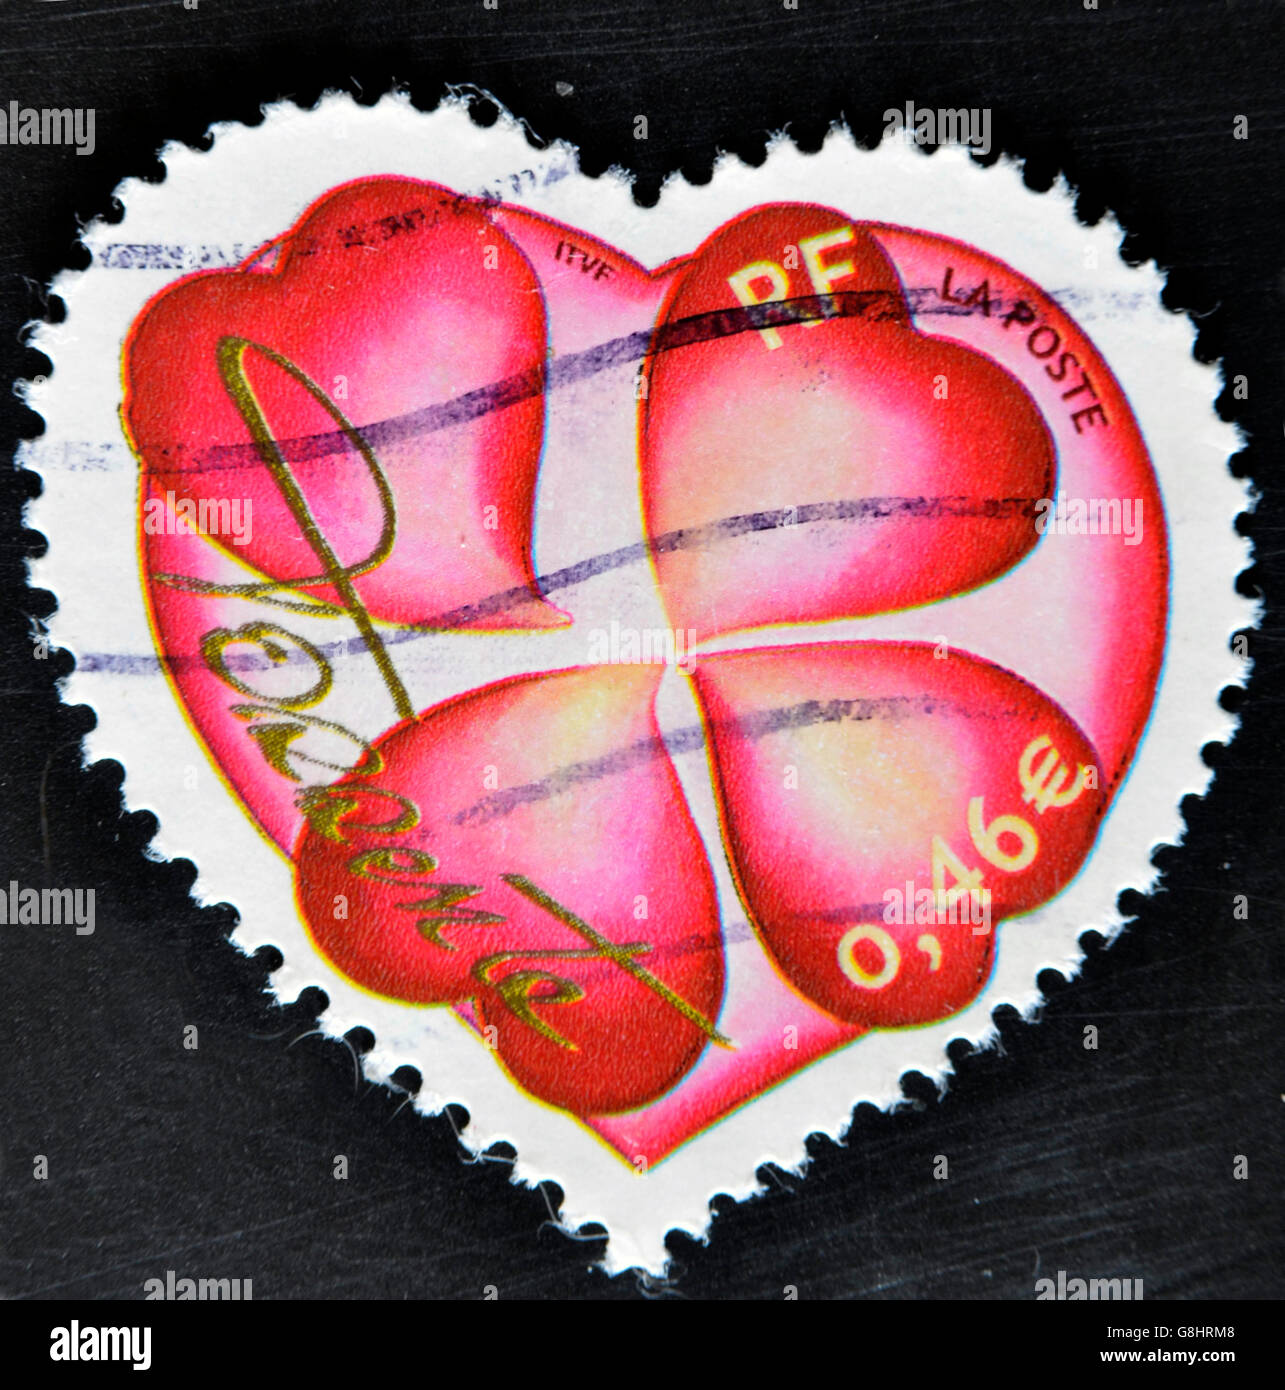 FRANCE - CIRCA 2003: A stamp printed in France shows a heart by Torrente, circa 2003 Stock Photo